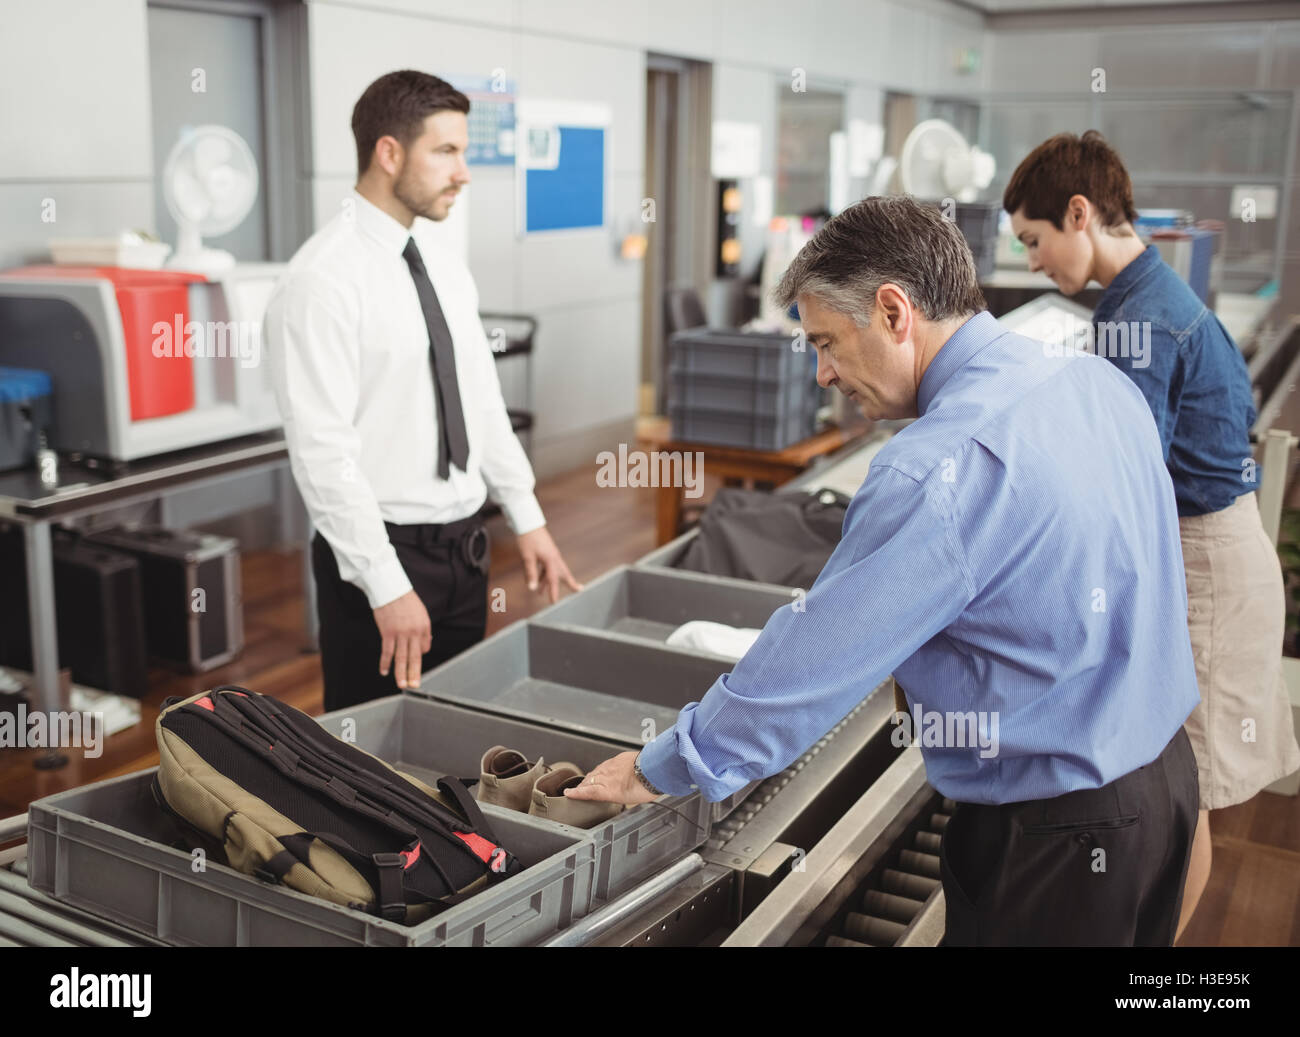 Man putting shoes into tray for security check Stock Photo